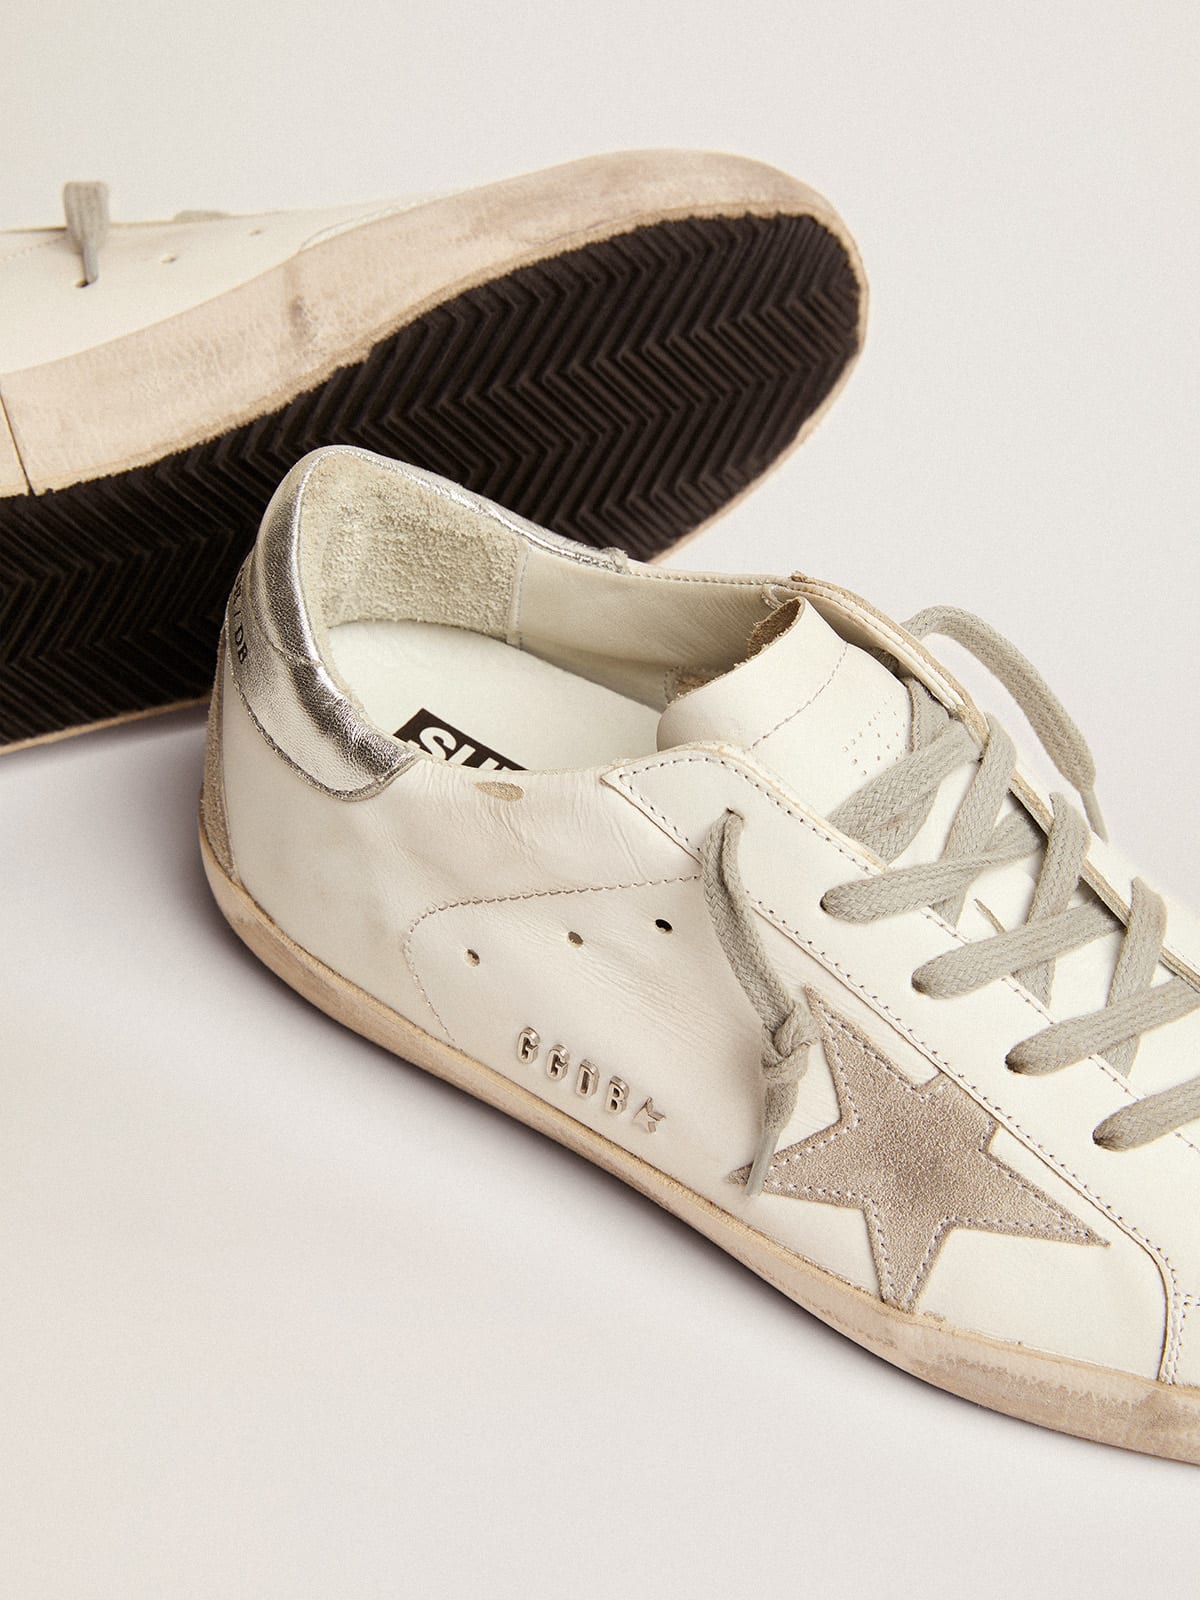 Women's Super-Star sneakers with silver heel tab and metal stud